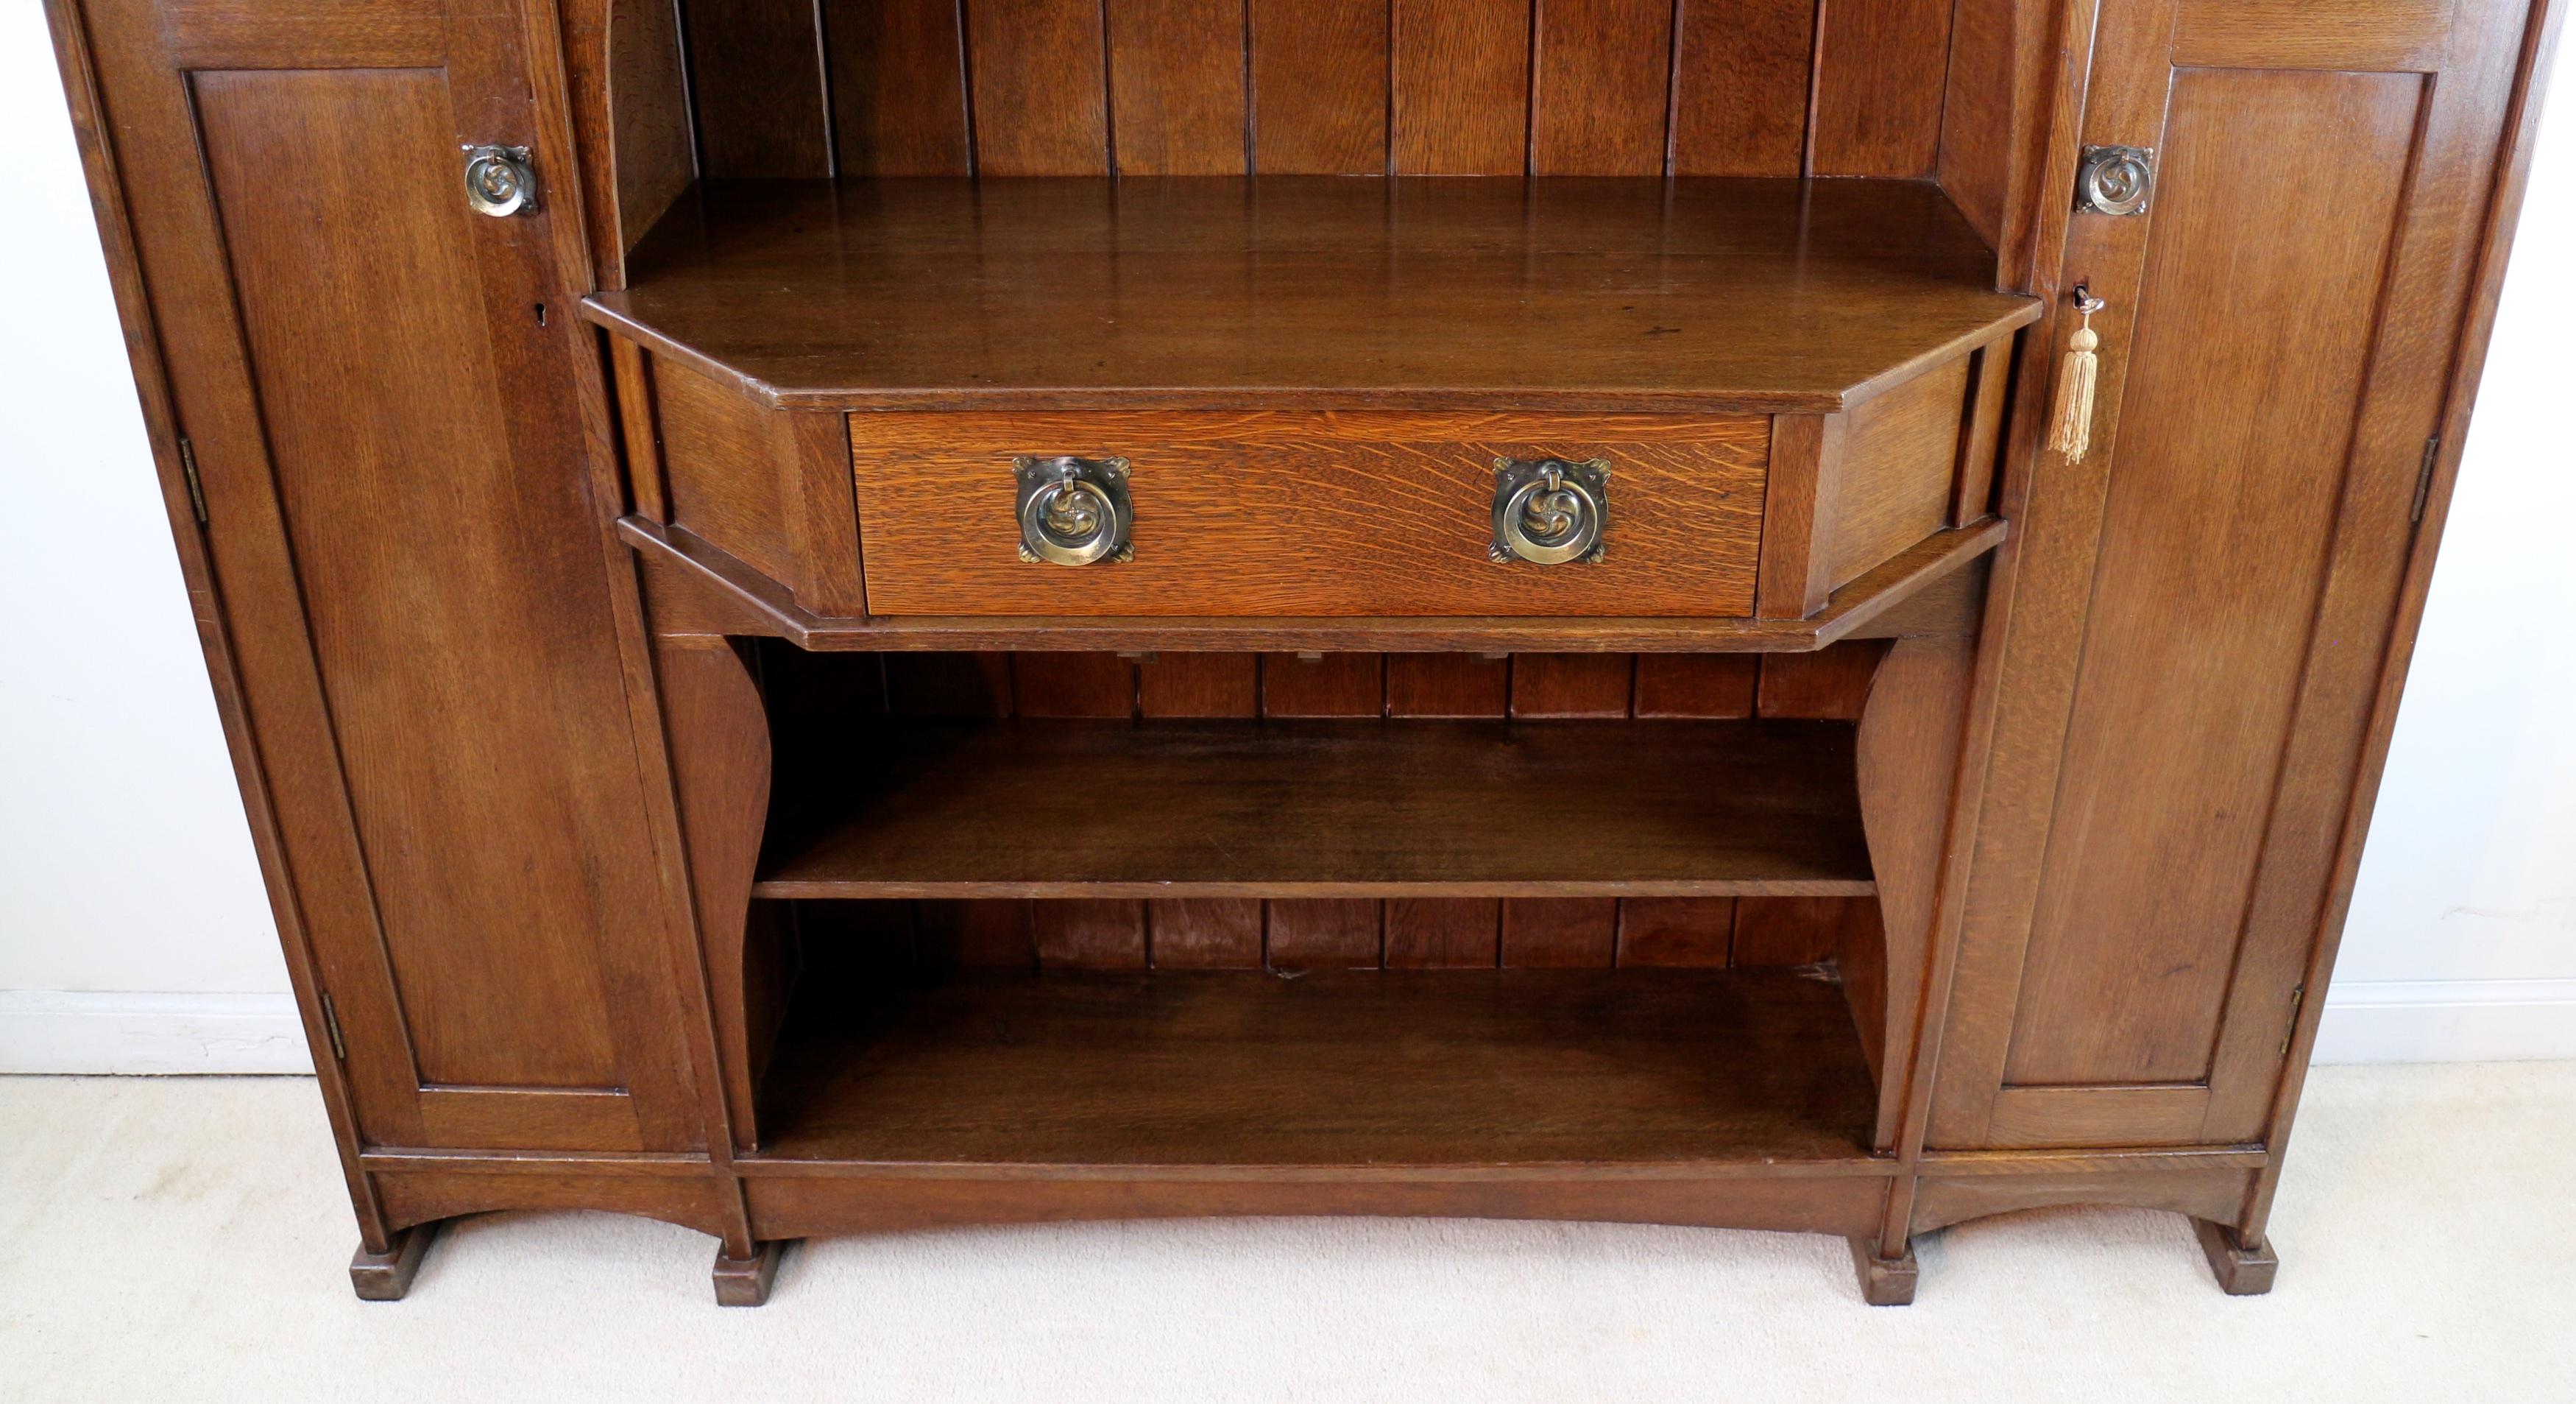 Antique English Liberty & Co Arts & Crafts Oak Hathaway Sideboard or Dresser In Good Condition For Sale In Glasgow, GB